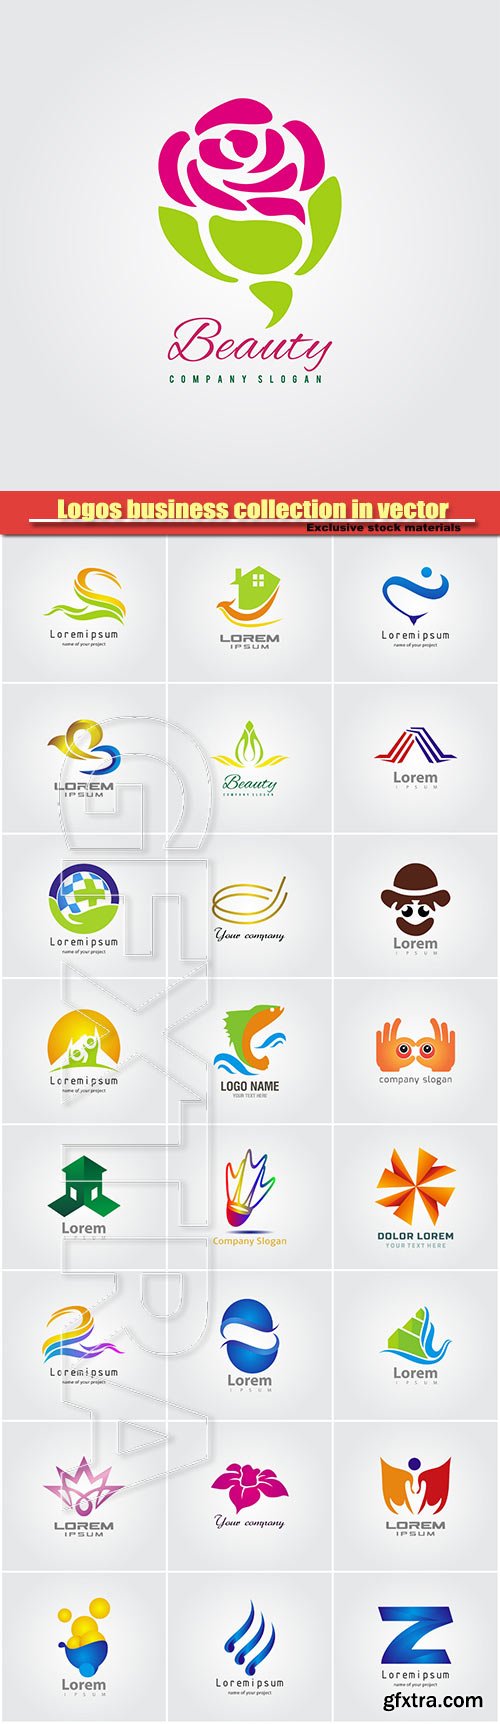 Logos business collection in vector #26